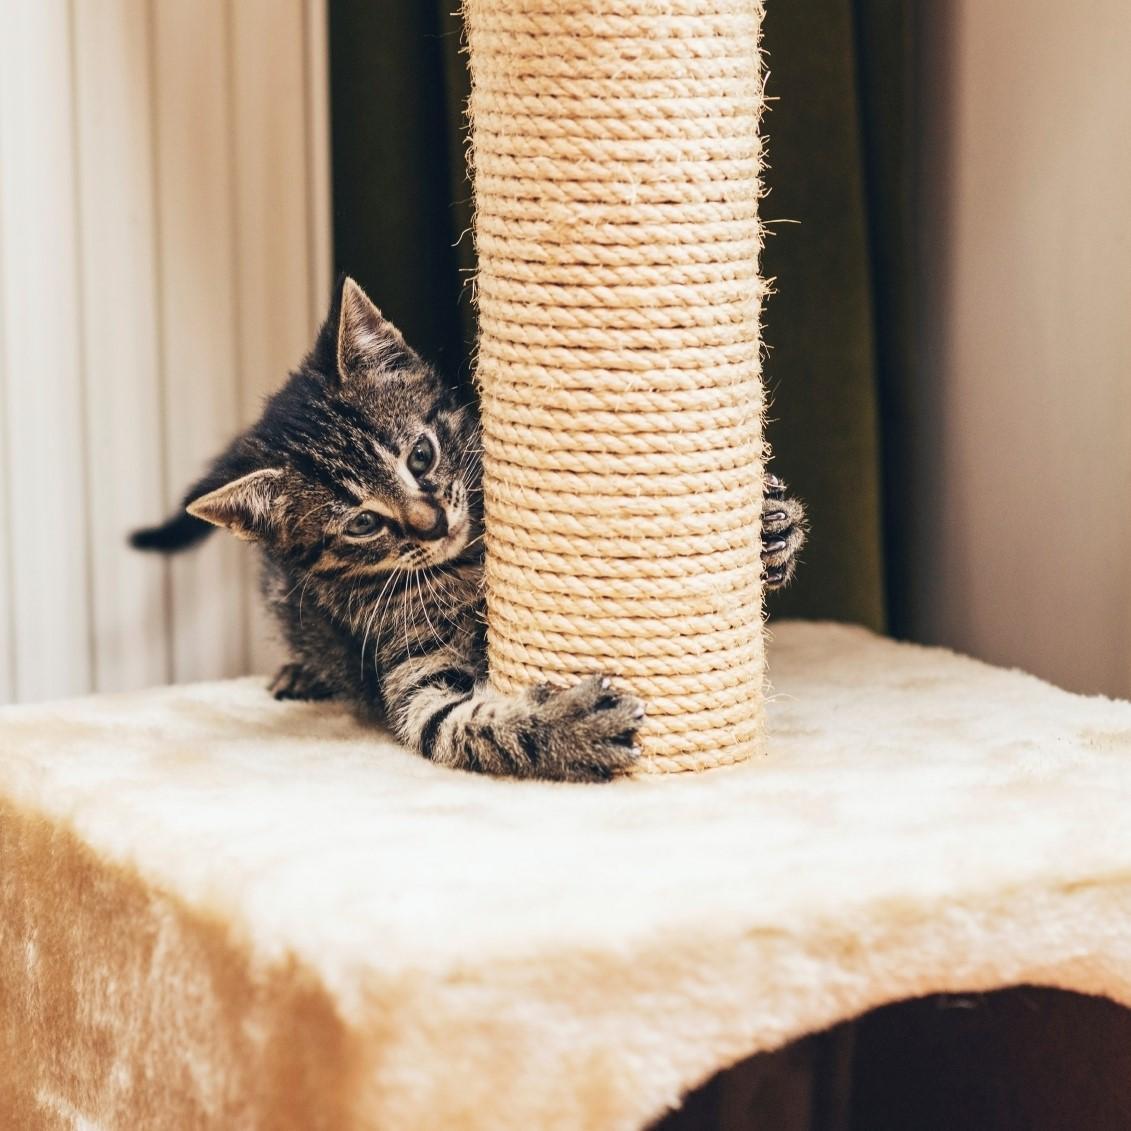 How to Make a Homemade Scratching Post for Cats